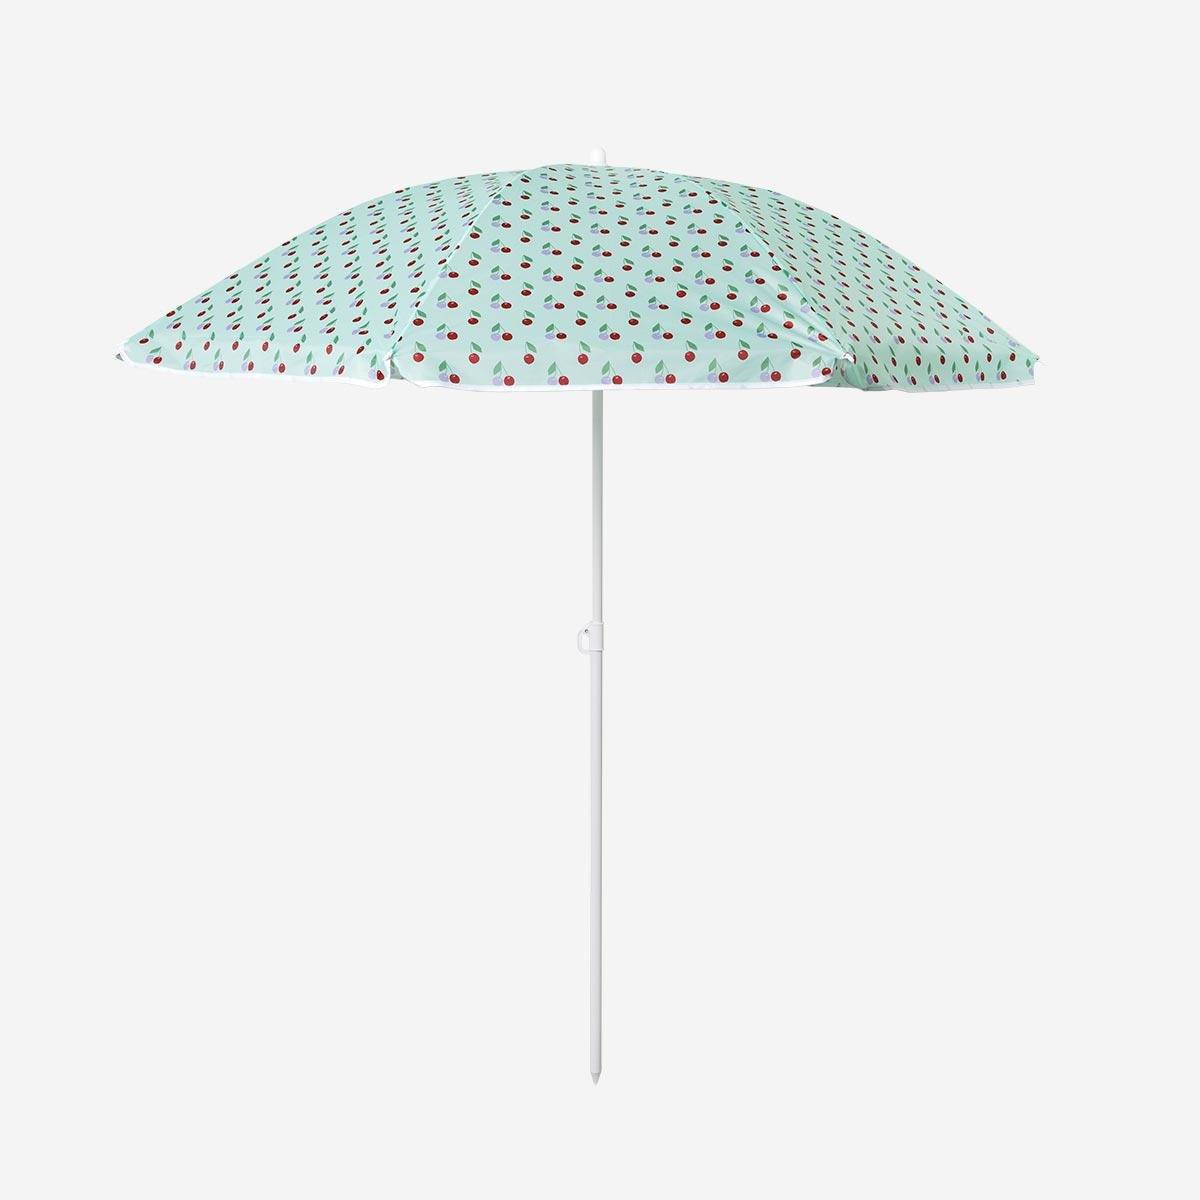 Multicolour parasol. with uv protection